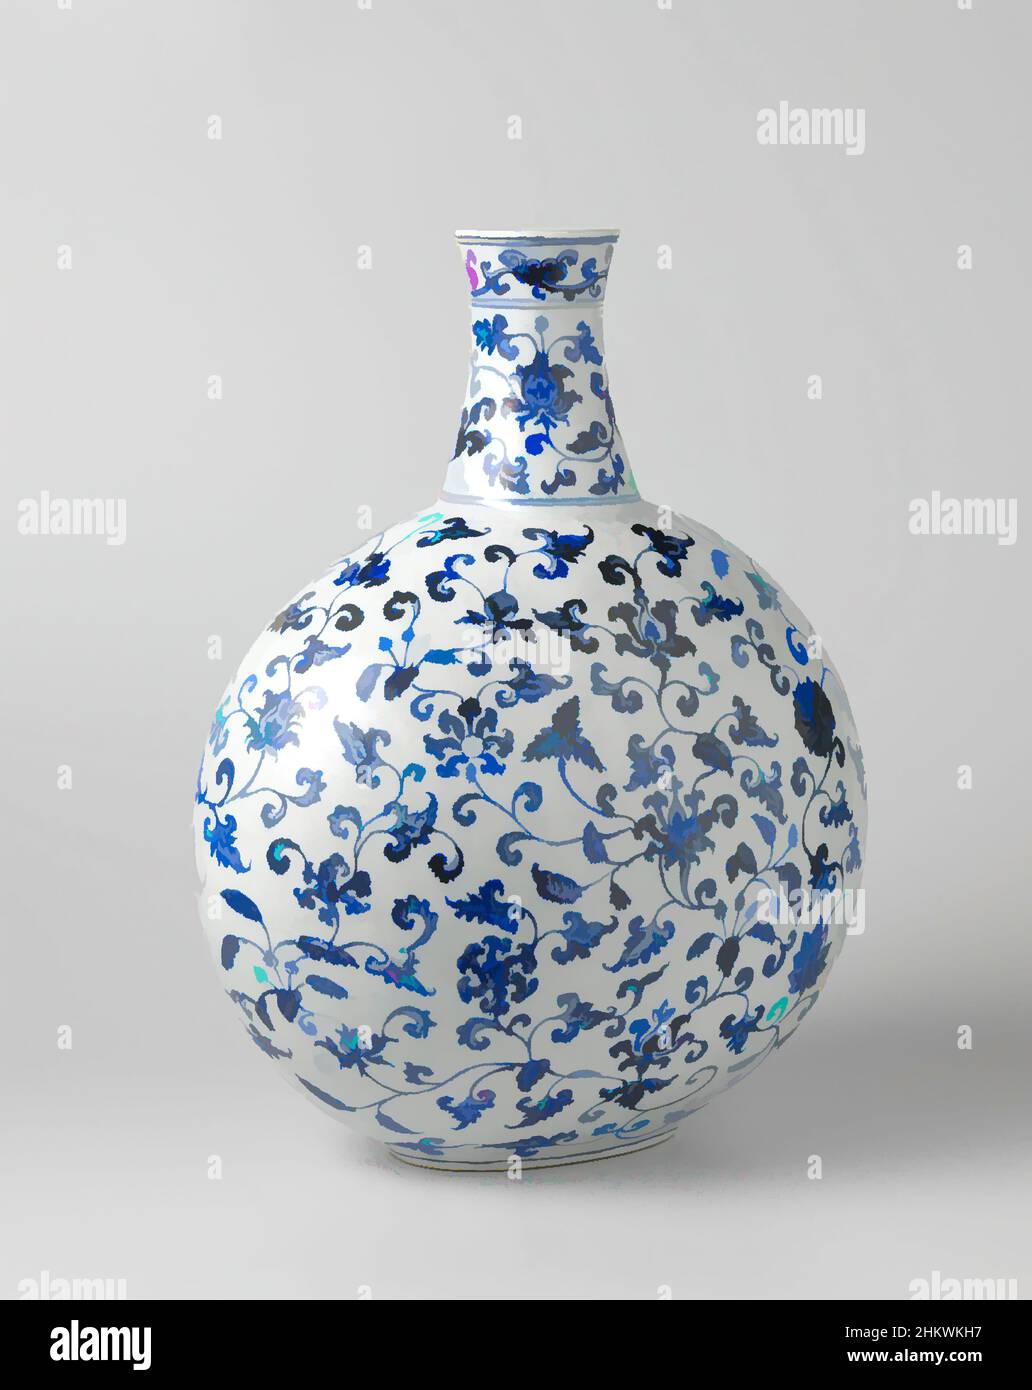 Art inspired by Bottle, Bottle with an overall pattern of floral scrolls, Flattened spherical bottle of porcelain, the neck tapers slightly towards the bottom and top, painted in underglaze blue. The entire bottle is decorated with a continuous pattern of floral and foliate scrolls (, Classic works modernized by Artotop with a splash of modernity. Shapes, color and value, eye-catching visual impact on art. Emotions through freedom of artworks in a contemporary way. A timeless message pursuing a wildly creative new direction. Artists turning to the digital medium and creating the Artotop NFT Stock Photo